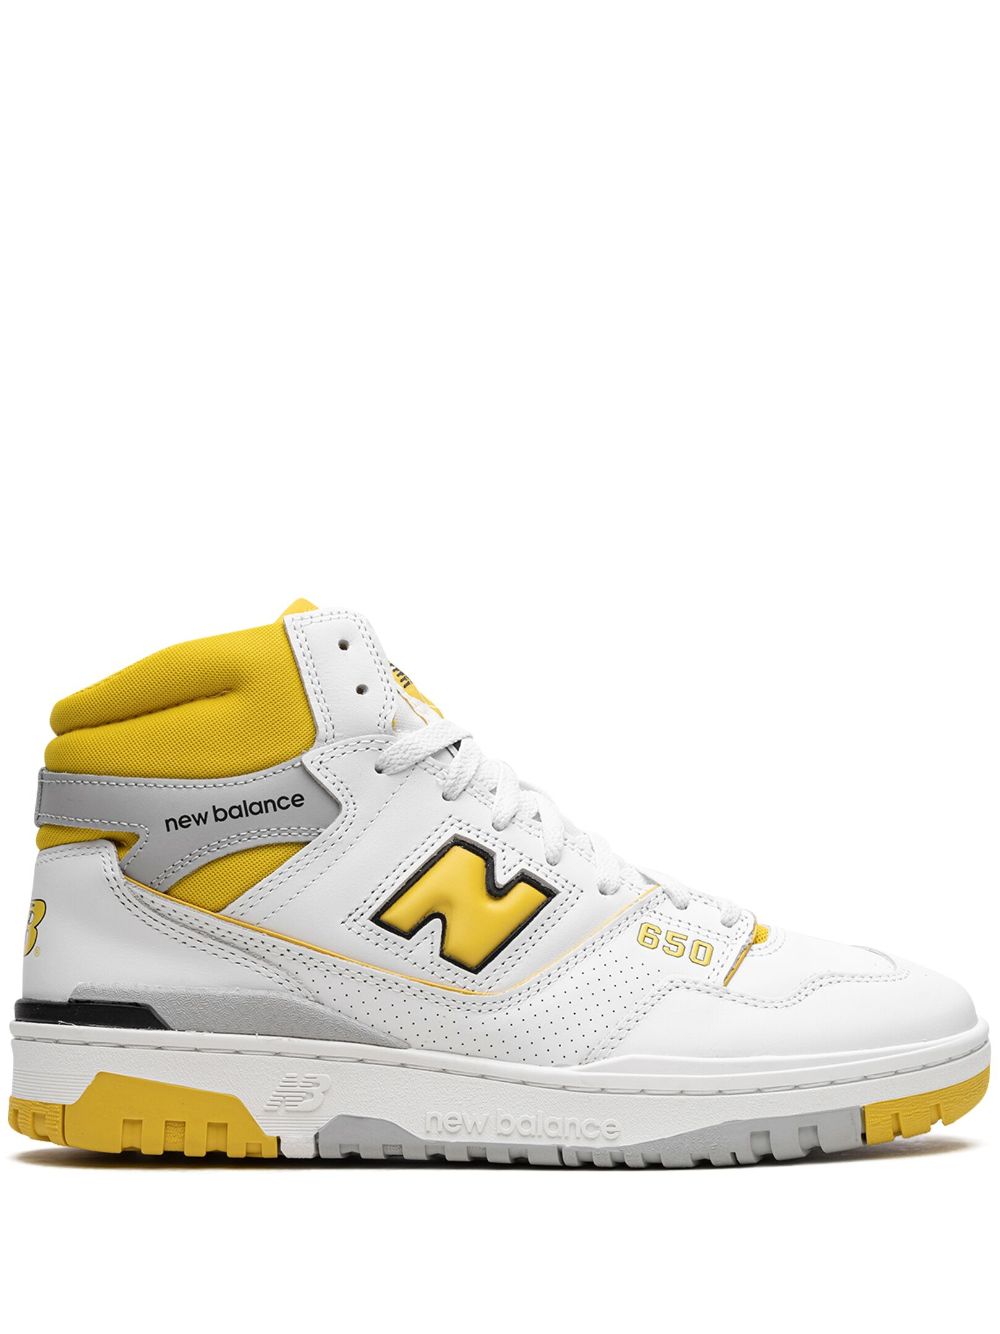 New Balance 650 "Honeycomb" high-top sneakers - White